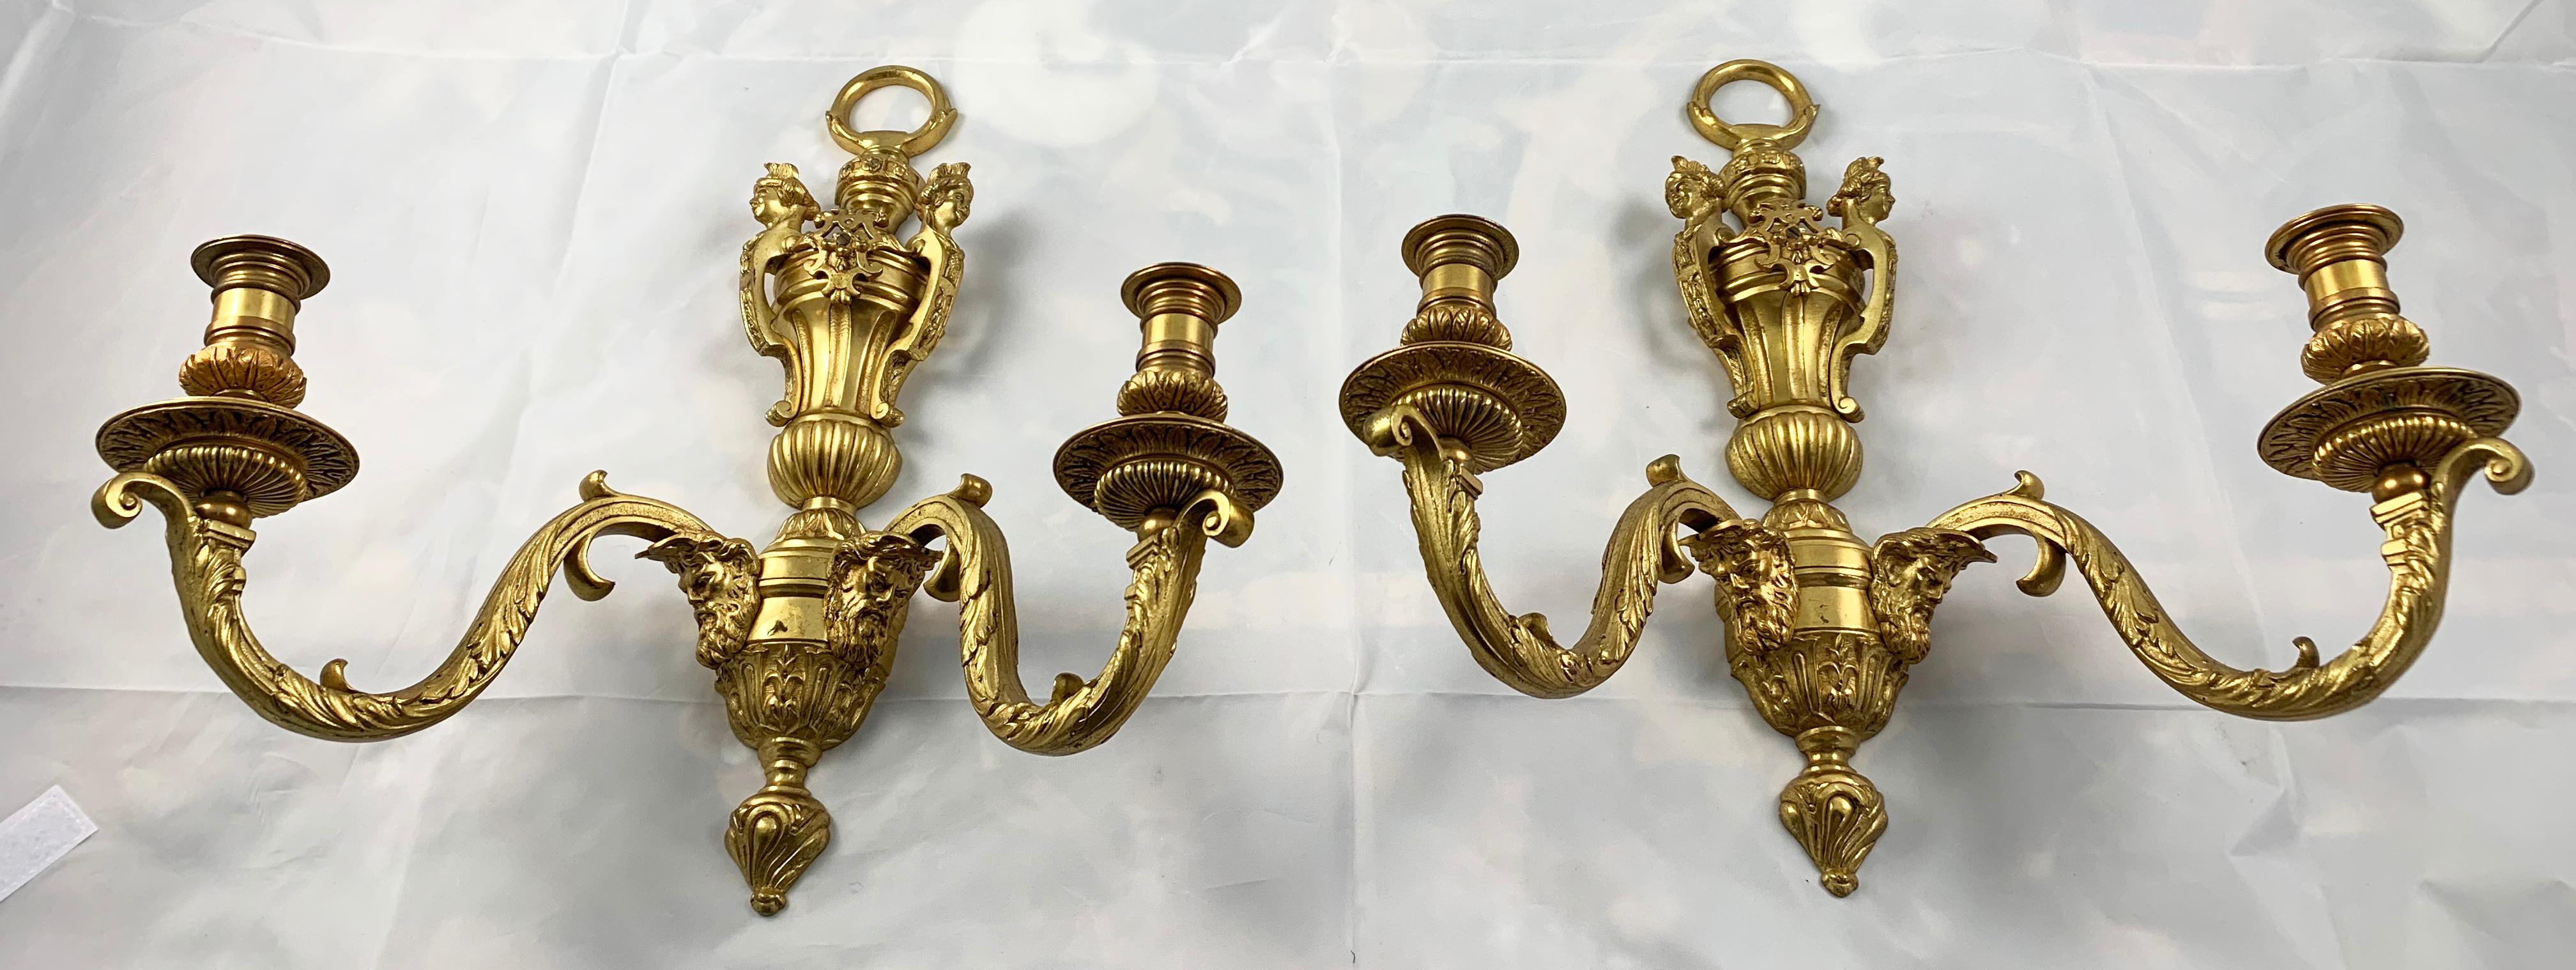 19th Century Fine Pair of Ormolu Two Branch Candelabra Wall Lights For Sale 1